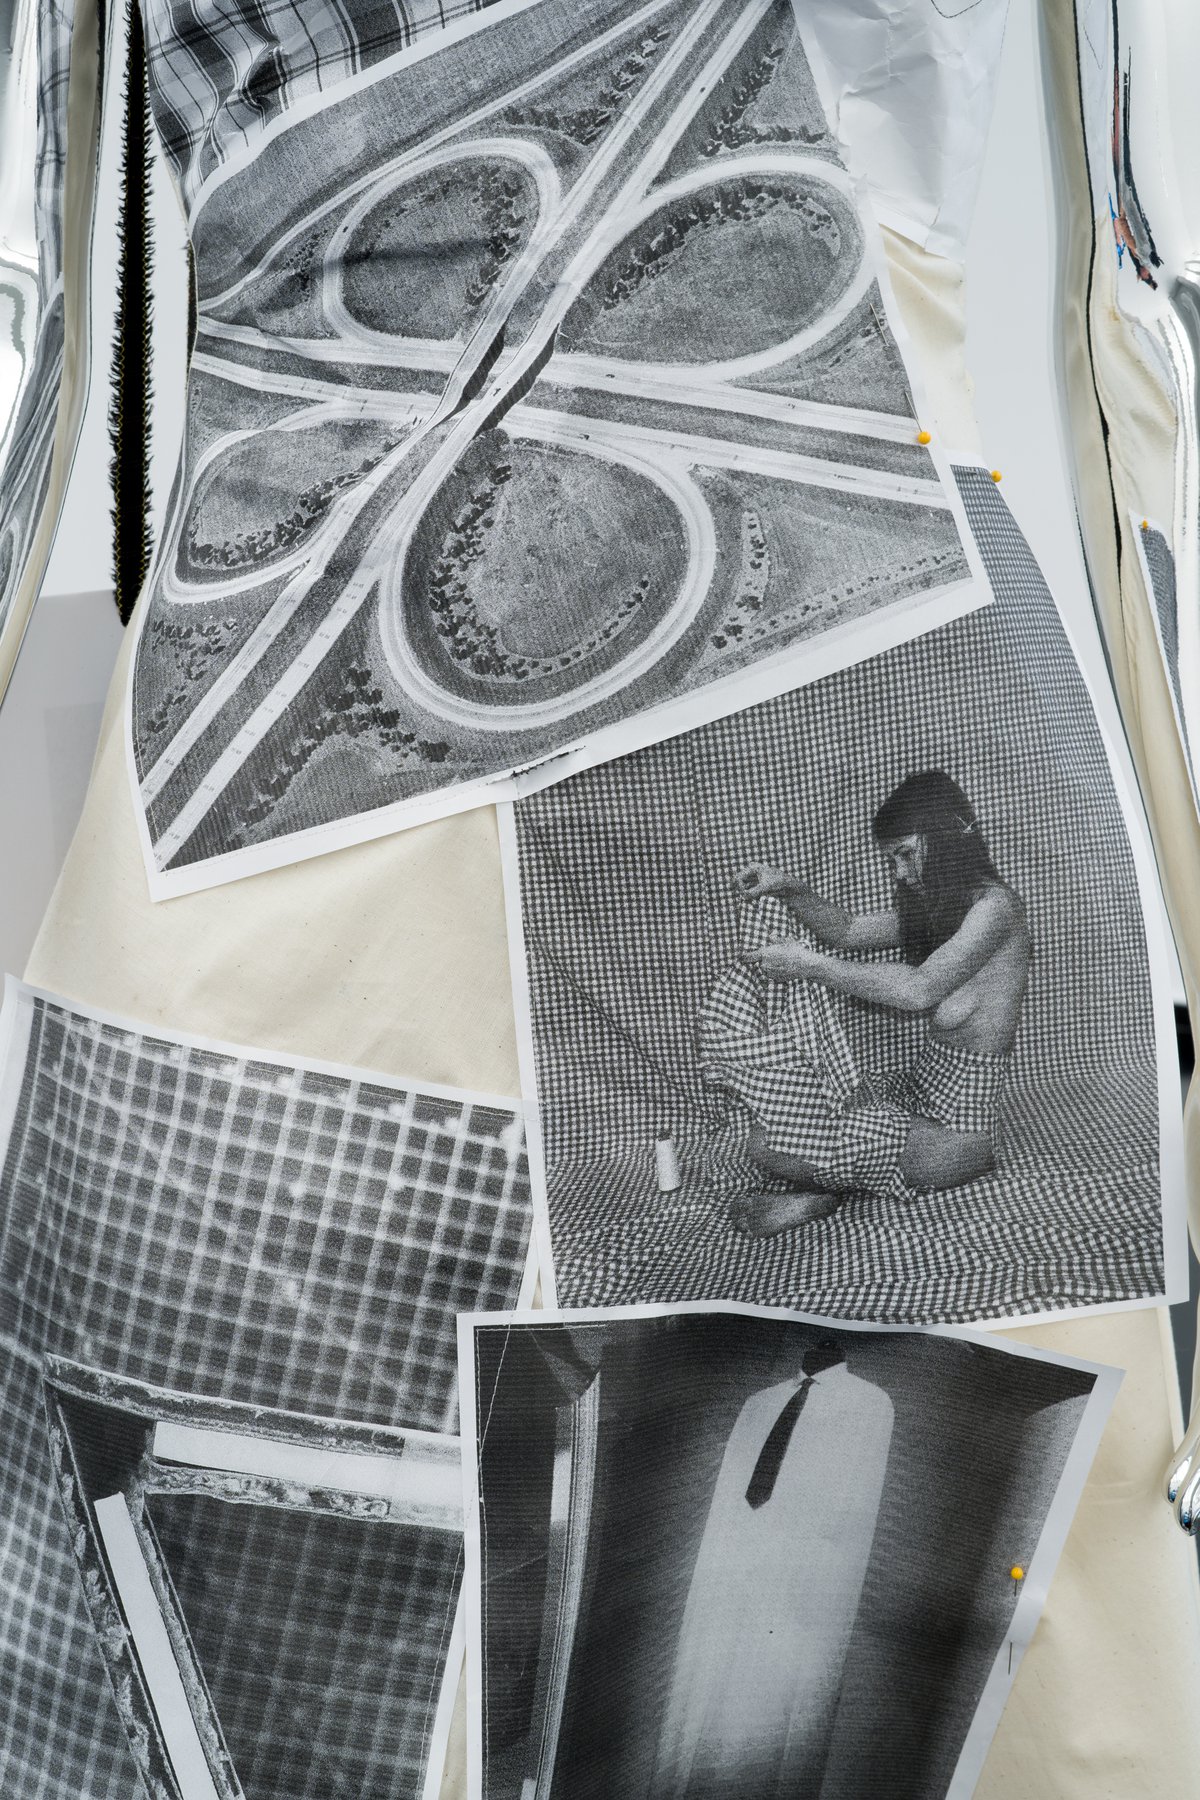 Anna-Sophie Berger and Teak RamosSomething for Everyone, Everything for No One, 2021Ten looks composed of black and white laser prints on A4 paper, polyester, tailoring cotton, organza, suit fabrics, zippers, thread, chrome mannequins, Detail view